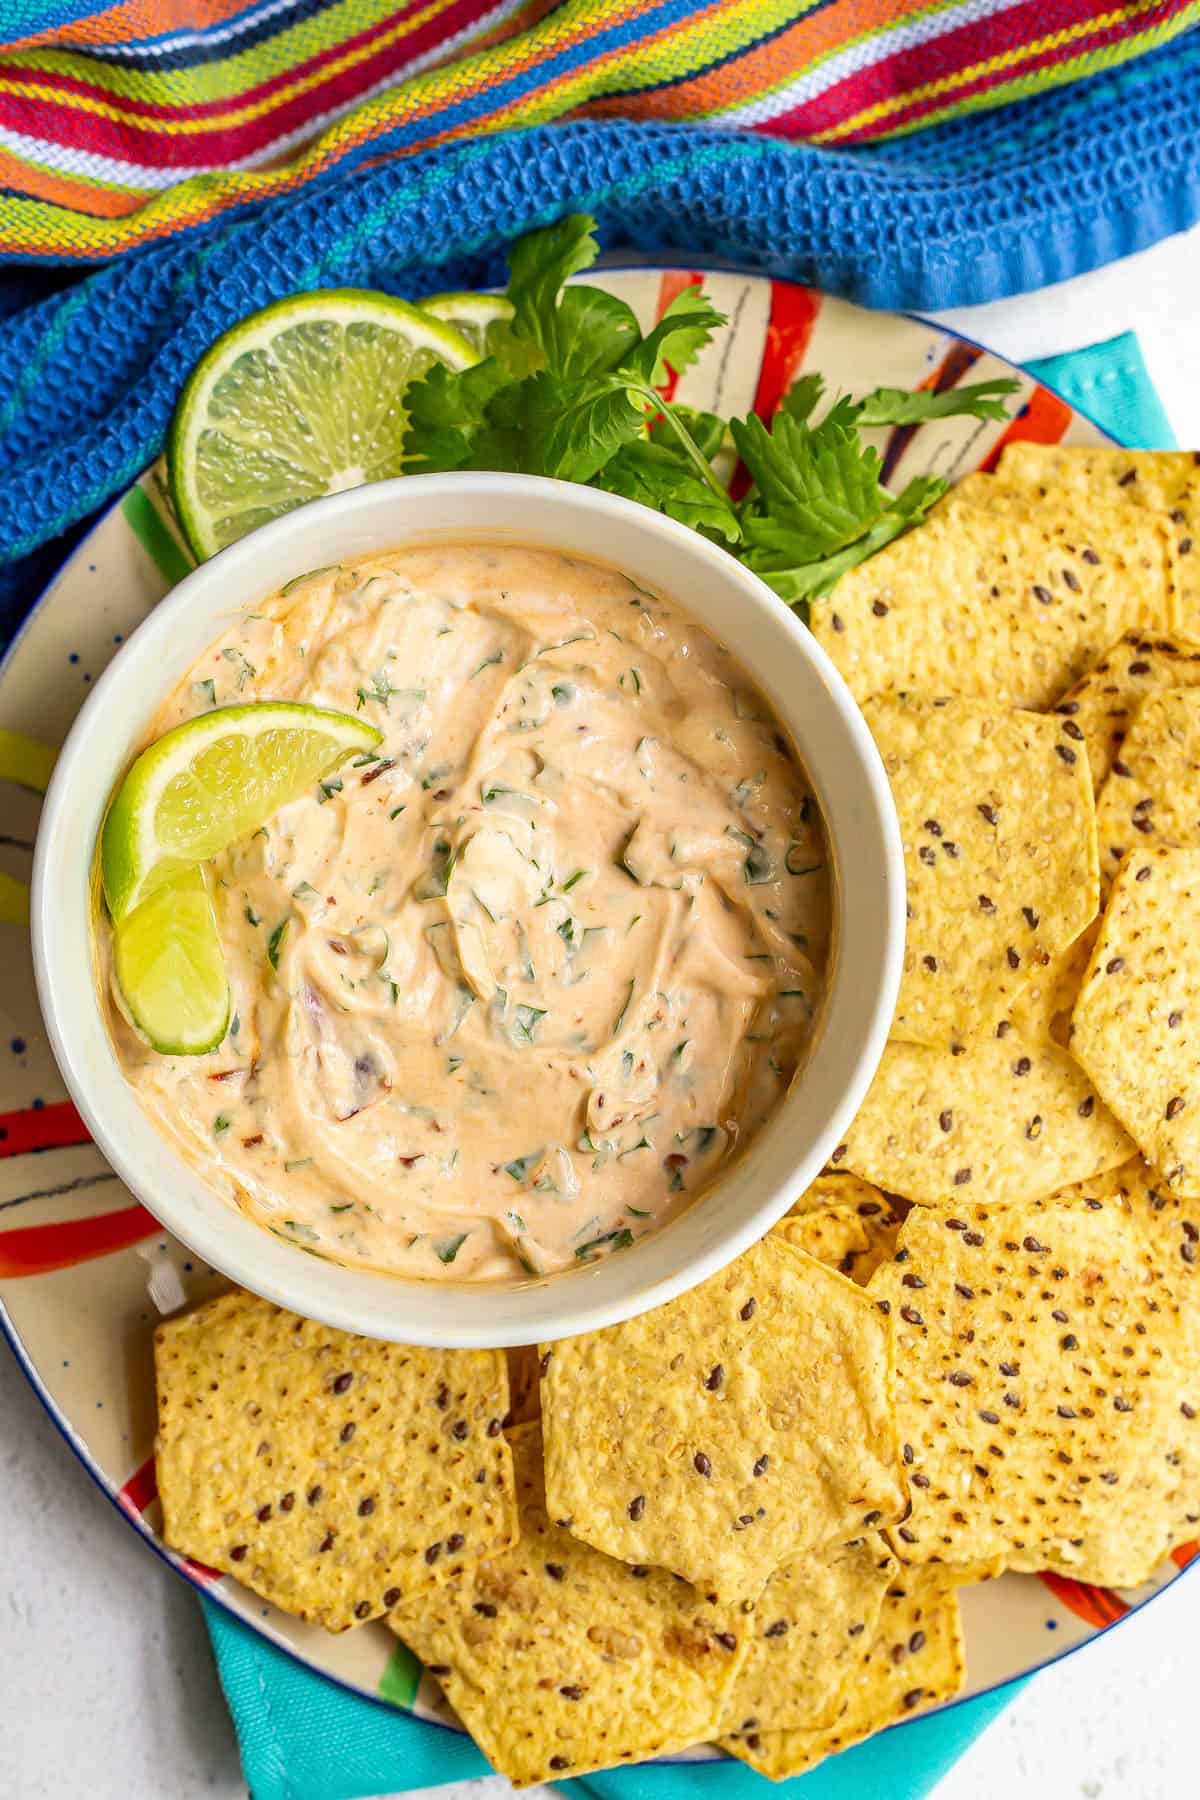 A creamy chili Greek yogurt dip served in a bowl with a garnish of lime wedges and tortilla chips served for dipping.